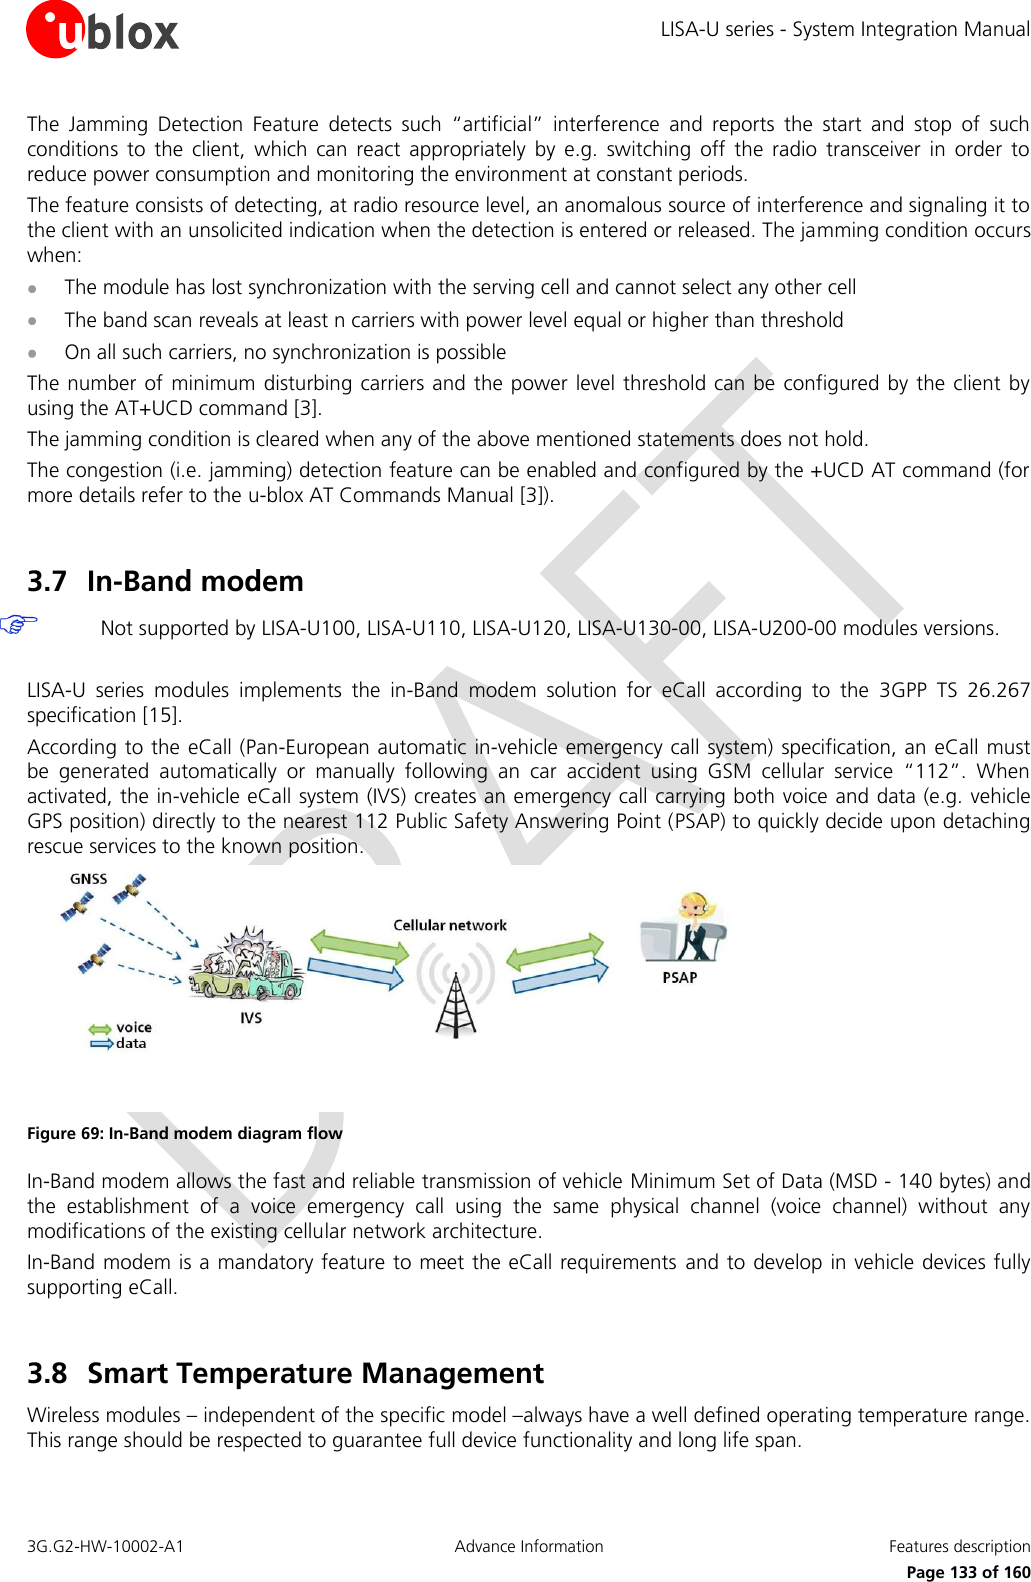 LISA-U series - System Integration Manual 3G.G2-HW-10002-A1  Advance Information  Features description      Page 133 of 160 The  Jamming  Detection  Feature  detects  such  “artificial”  interference  and  reports  the  start  and  stop  of  such conditions  to  the  client,  which  can  react  appropriately  by  e.g.  switching  off  the  radio  transceiver  in  order  to reduce power consumption and monitoring the environment at constant periods. The feature consists of detecting, at radio resource level, an anomalous source of interference and signaling it to the client with an unsolicited indication when the detection is entered or released. The jamming condition occurs when:  The module has lost synchronization with the serving cell and cannot select any other cell  The band scan reveals at least n carriers with power level equal or higher than threshold  On all such carriers, no synchronization is possible The number of  minimum disturbing carriers  and the power level threshold  can be configured by the client by using the AT+UCD command [3]. The jamming condition is cleared when any of the above mentioned statements does not hold. The congestion (i.e. jamming) detection feature can be enabled and configured by the +UCD AT command (for more details refer to the u-blox AT Commands Manual [3]).  3.7 In-Band modem  Not supported by LISA-U100, LISA-U110, LISA-U120, LISA-U130-00, LISA-U200-00 modules versions.  LISA-U  series  modules  implements  the  in-Band  modem  solution  for  eCall  according  to  the  3GPP  TS  26.267 specification [15]. According to the eCall (Pan-European automatic in-vehicle emergency call system) specification, an eCall must be  generated  automatically  or  manually  following  an  car  accident  using  GSM  cellular  service  “112”.  When activated, the in-vehicle eCall system (IVS) creates an emergency call carrying both voice and data (e.g. vehicle GPS position) directly to the nearest 112 Public Safety Answering Point (PSAP) to quickly decide upon detaching rescue services to the known position.  Figure 69: In-Band modem diagram flow In-Band modem allows the fast and reliable transmission of vehicle Minimum Set of Data (MSD - 140 bytes) and the  establishment  of  a  voice  emergency  call  using  the  same  physical  channel  (voice  channel)  without  any modifications of the existing cellular network architecture. In-Band modem is a mandatory feature to meet the eCall requirements and to develop in vehicle devices fully supporting eCall.  3.8 Smart Temperature Management  Wireless modules – independent of the specific model –always have a well defined operating temperature range. This range should be respected to guarantee full device functionality and long life span. 